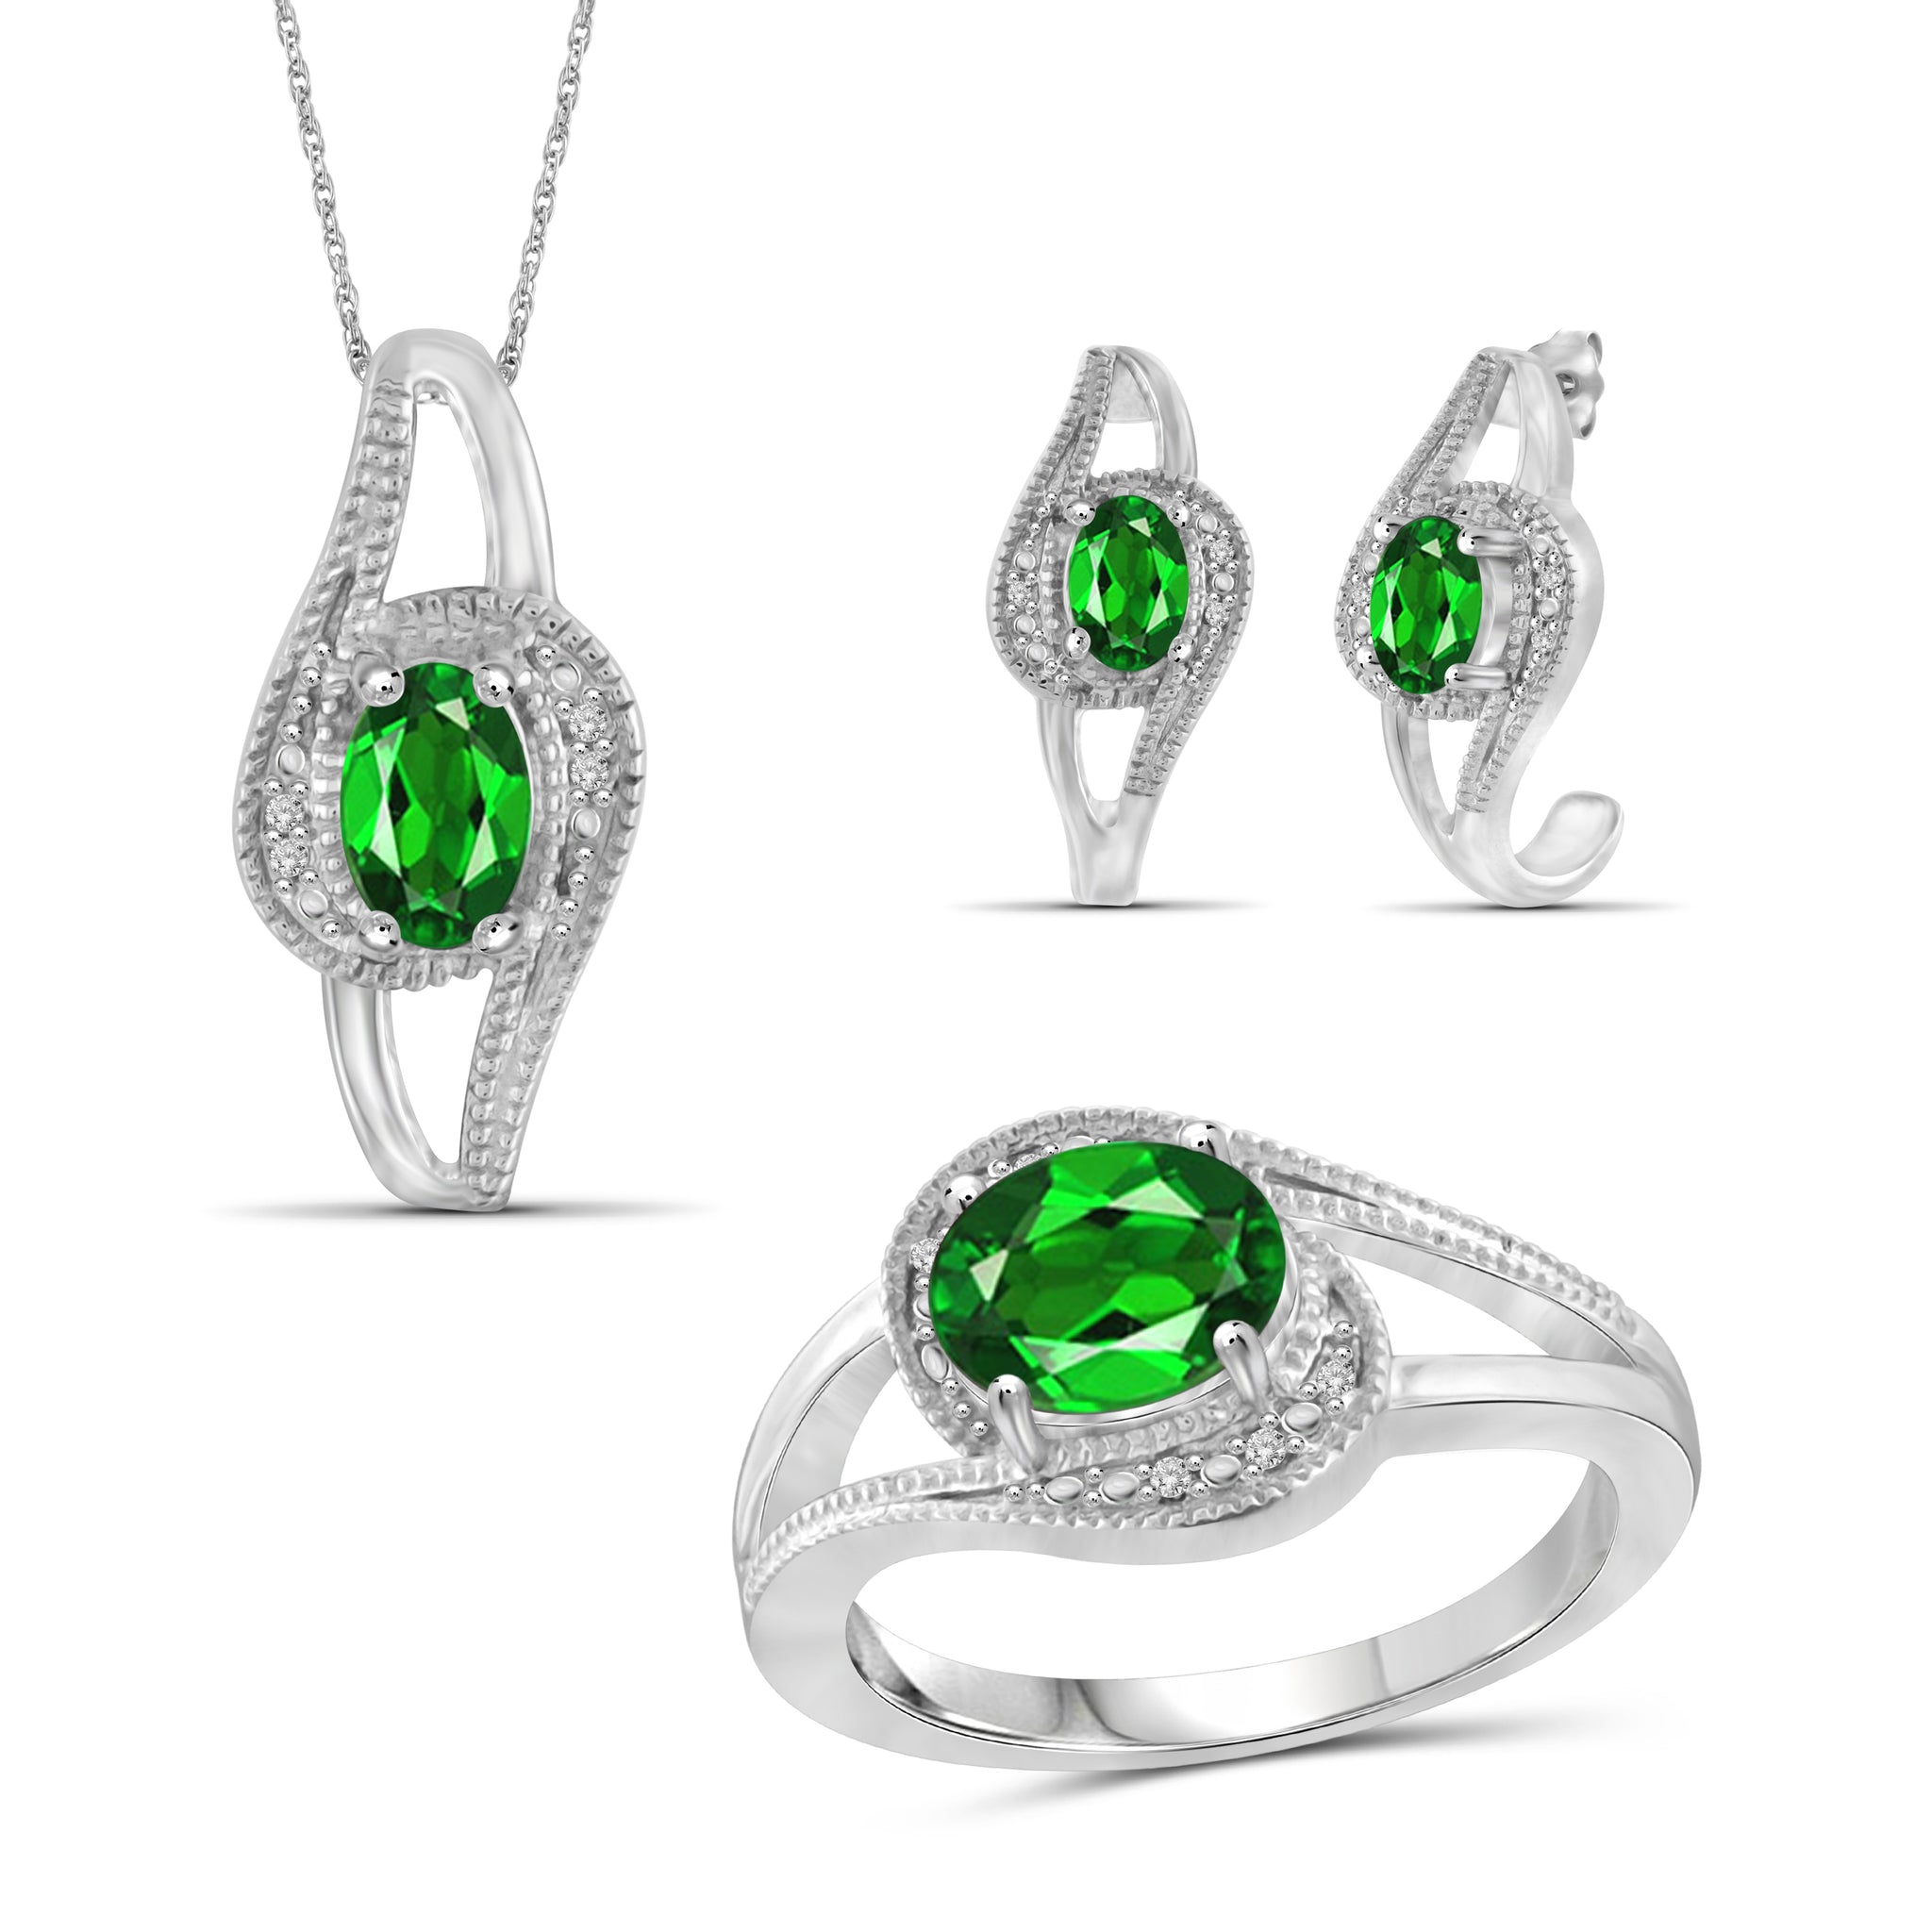 JewelonFire 2.85 Carat T.G.W. Chrome Diopside And 1/20 Carat T.W. White Diamond Sterling Silver 3 Piece Jewelry Set - Assorted Colors